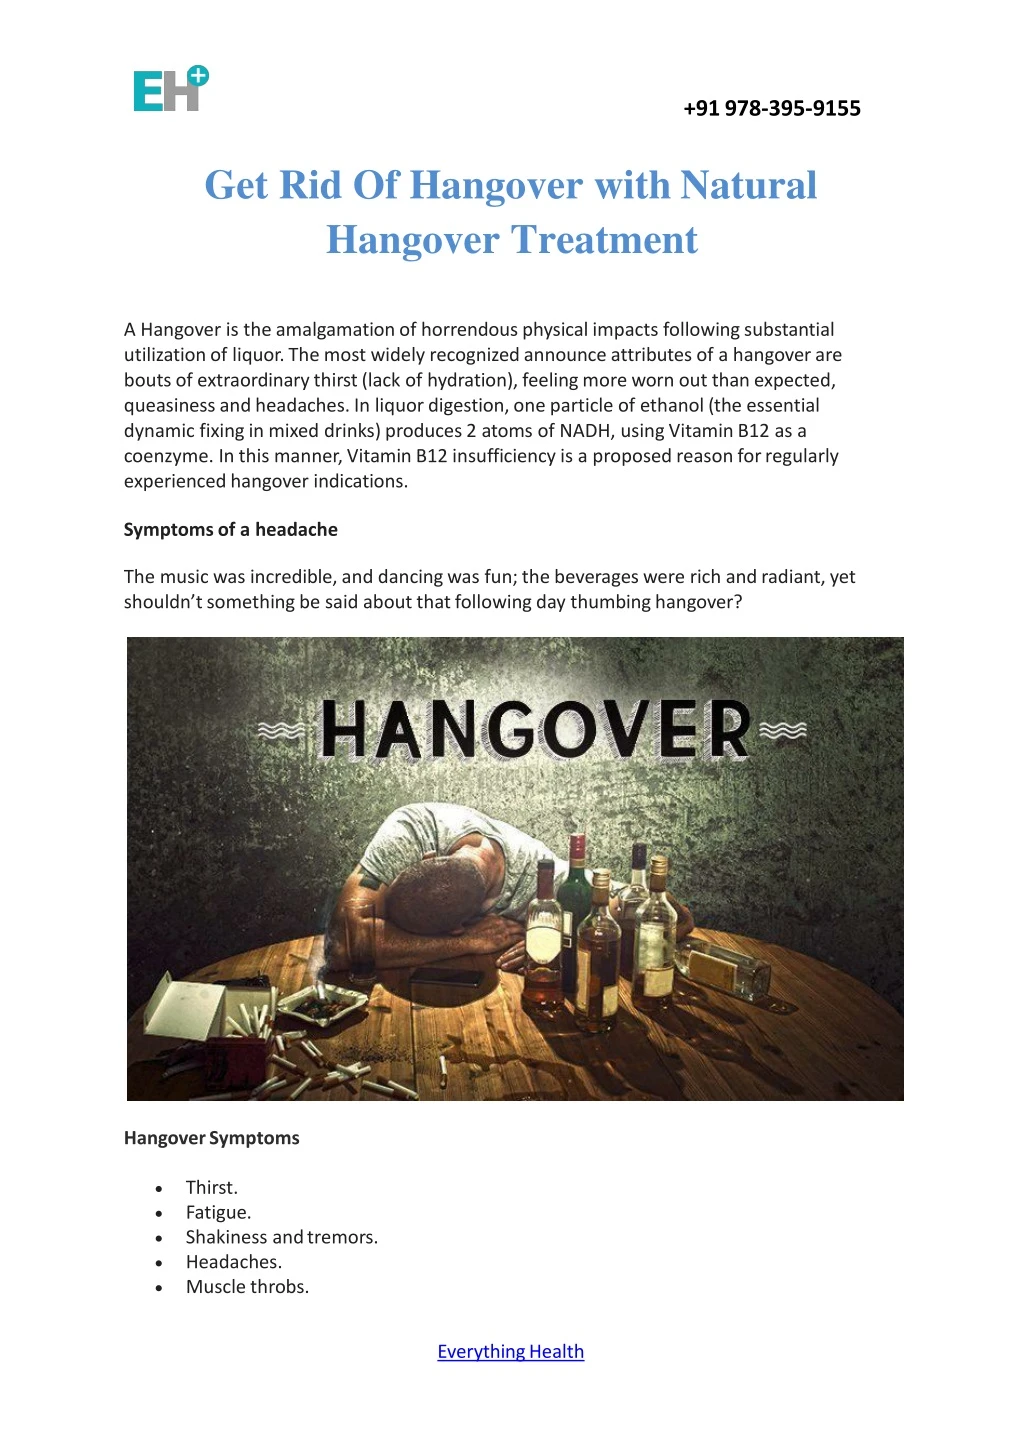 get rid of hangover with natural hangover treatment